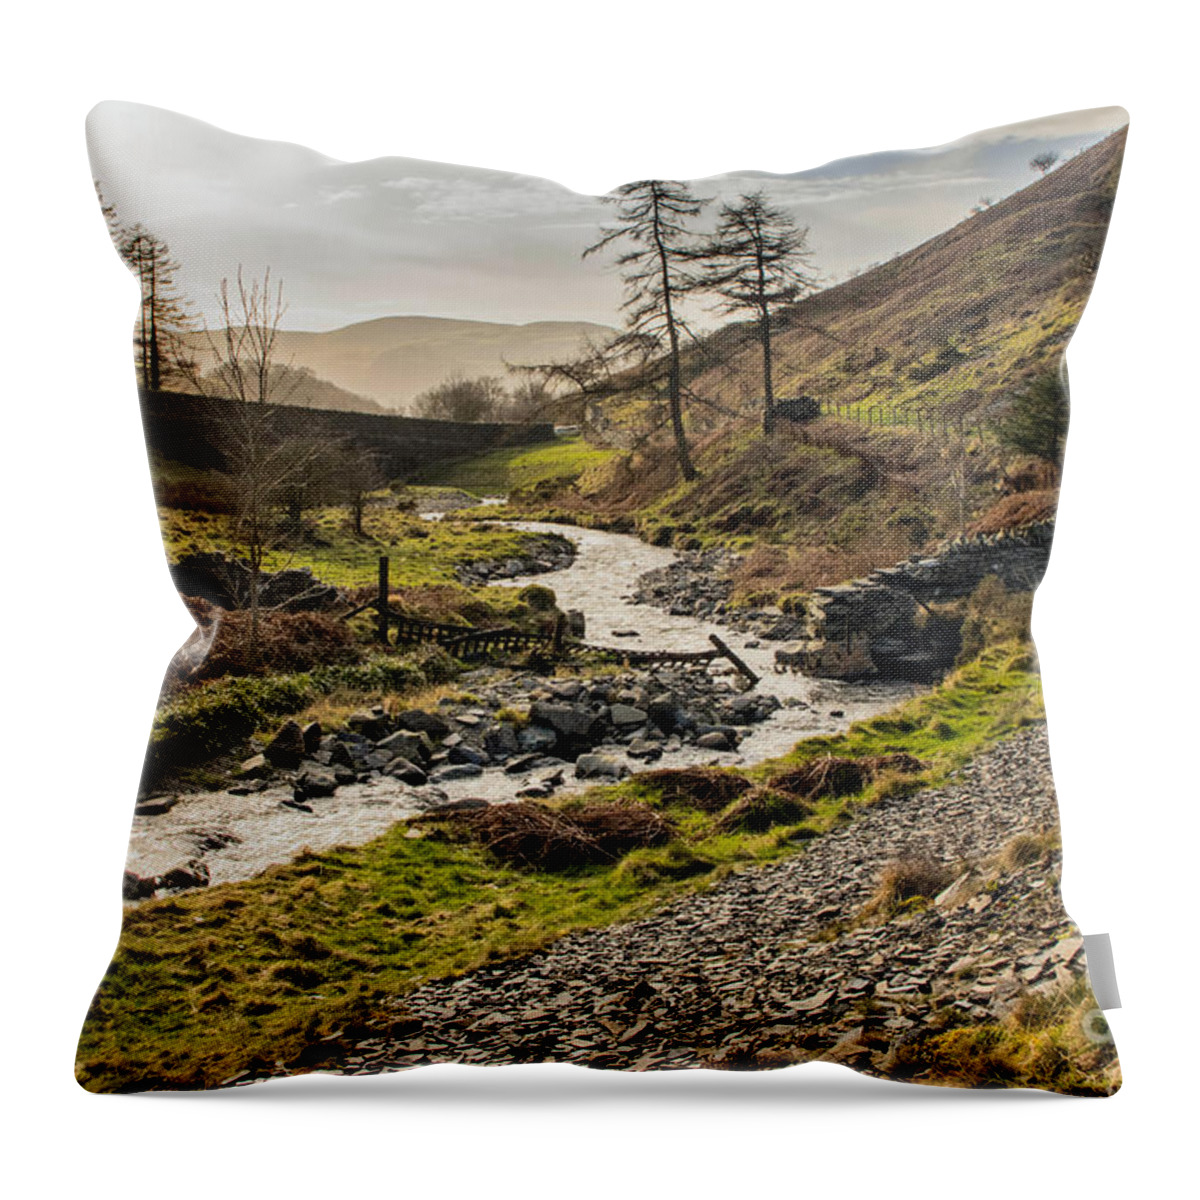 Stream - Mountains - Sky - Trees - Bridge Throw Pillow featuring the photograph Lakeland Stream by Chris Horsnell